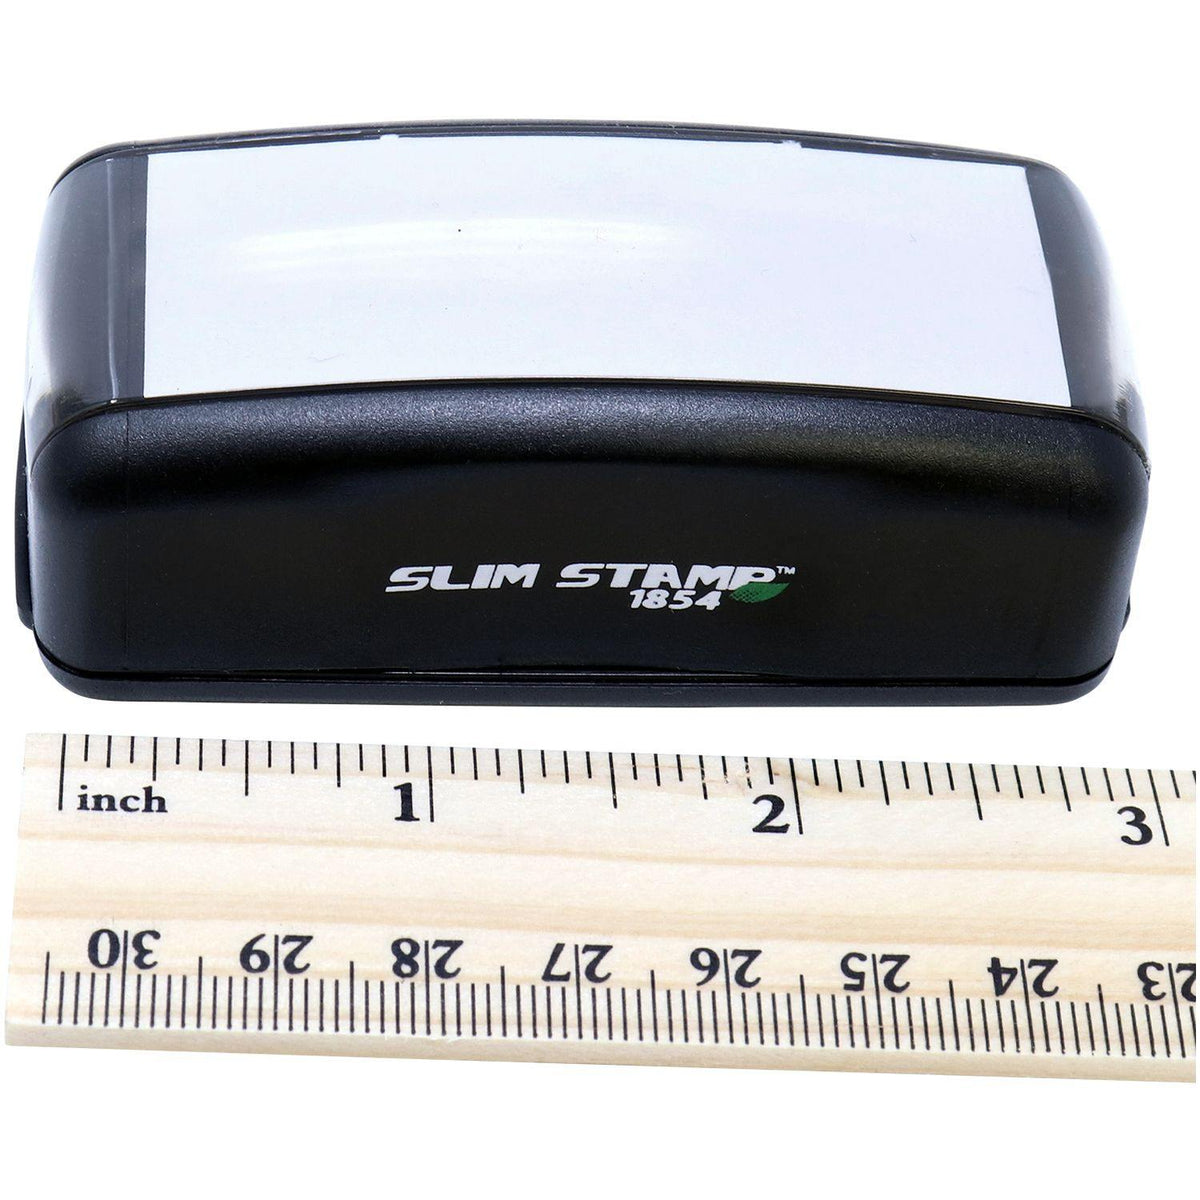 Measurement Large Pre-Inked Narrow Font Second Notice Stamp with Ruler